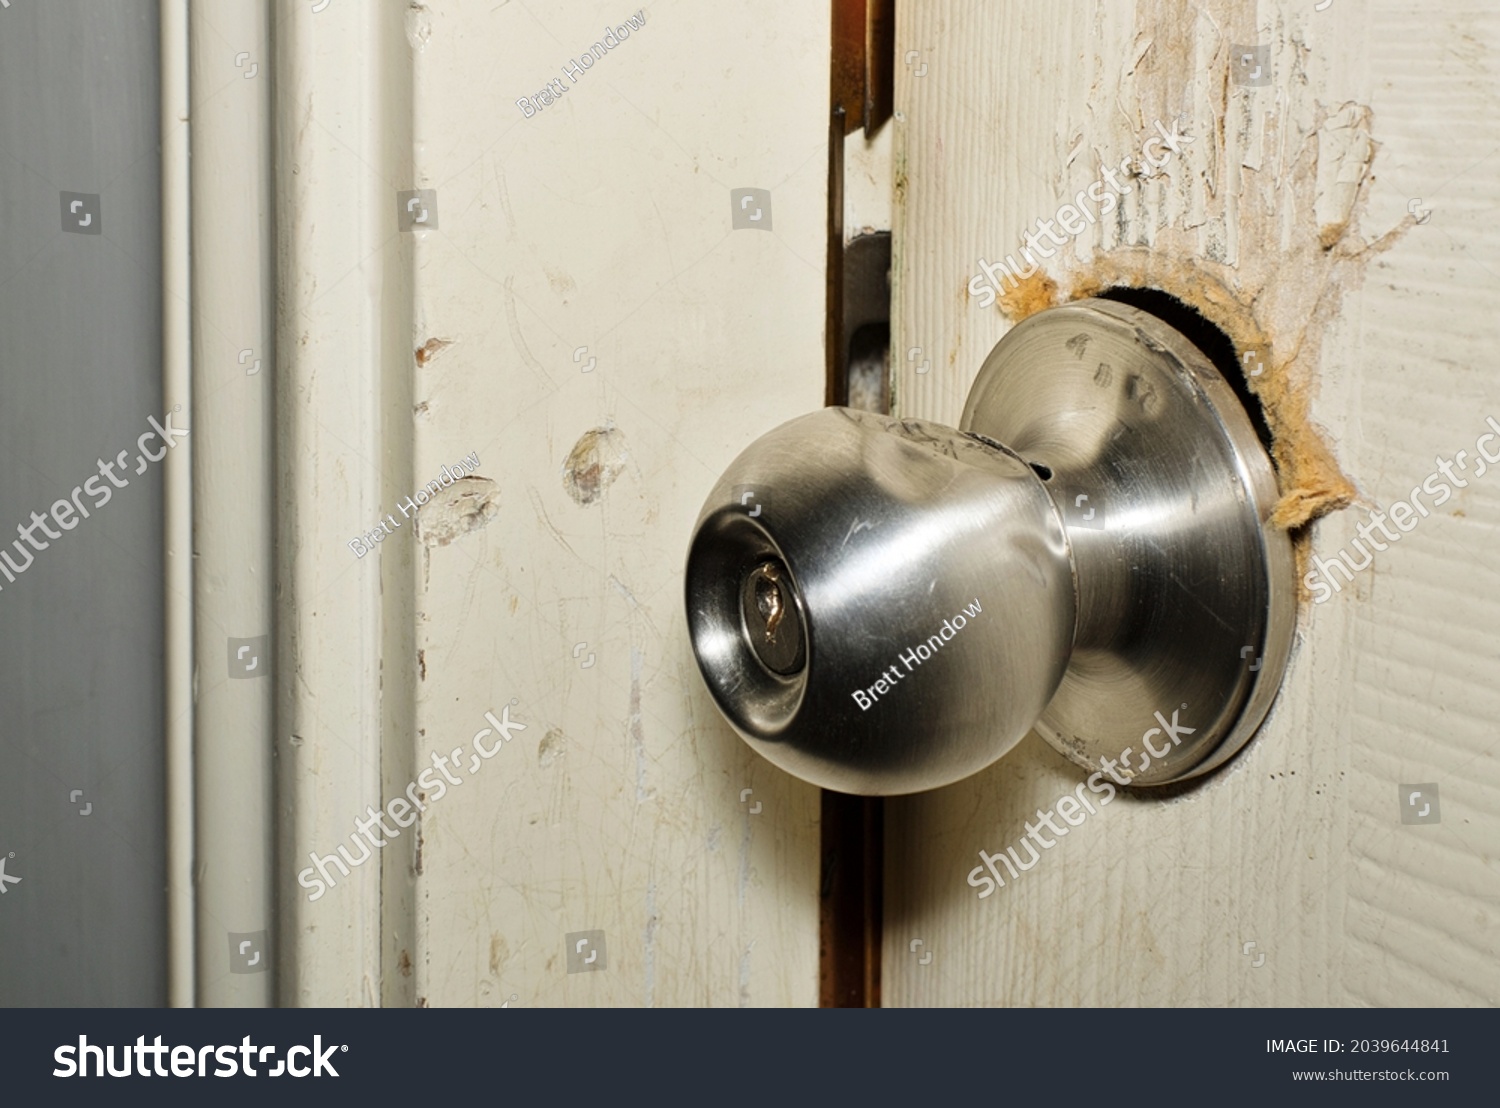 Broken modern doorknob closeup with signs of forced entry, criminal activity and door slightly open. Breaking and entering concept. #2039644841